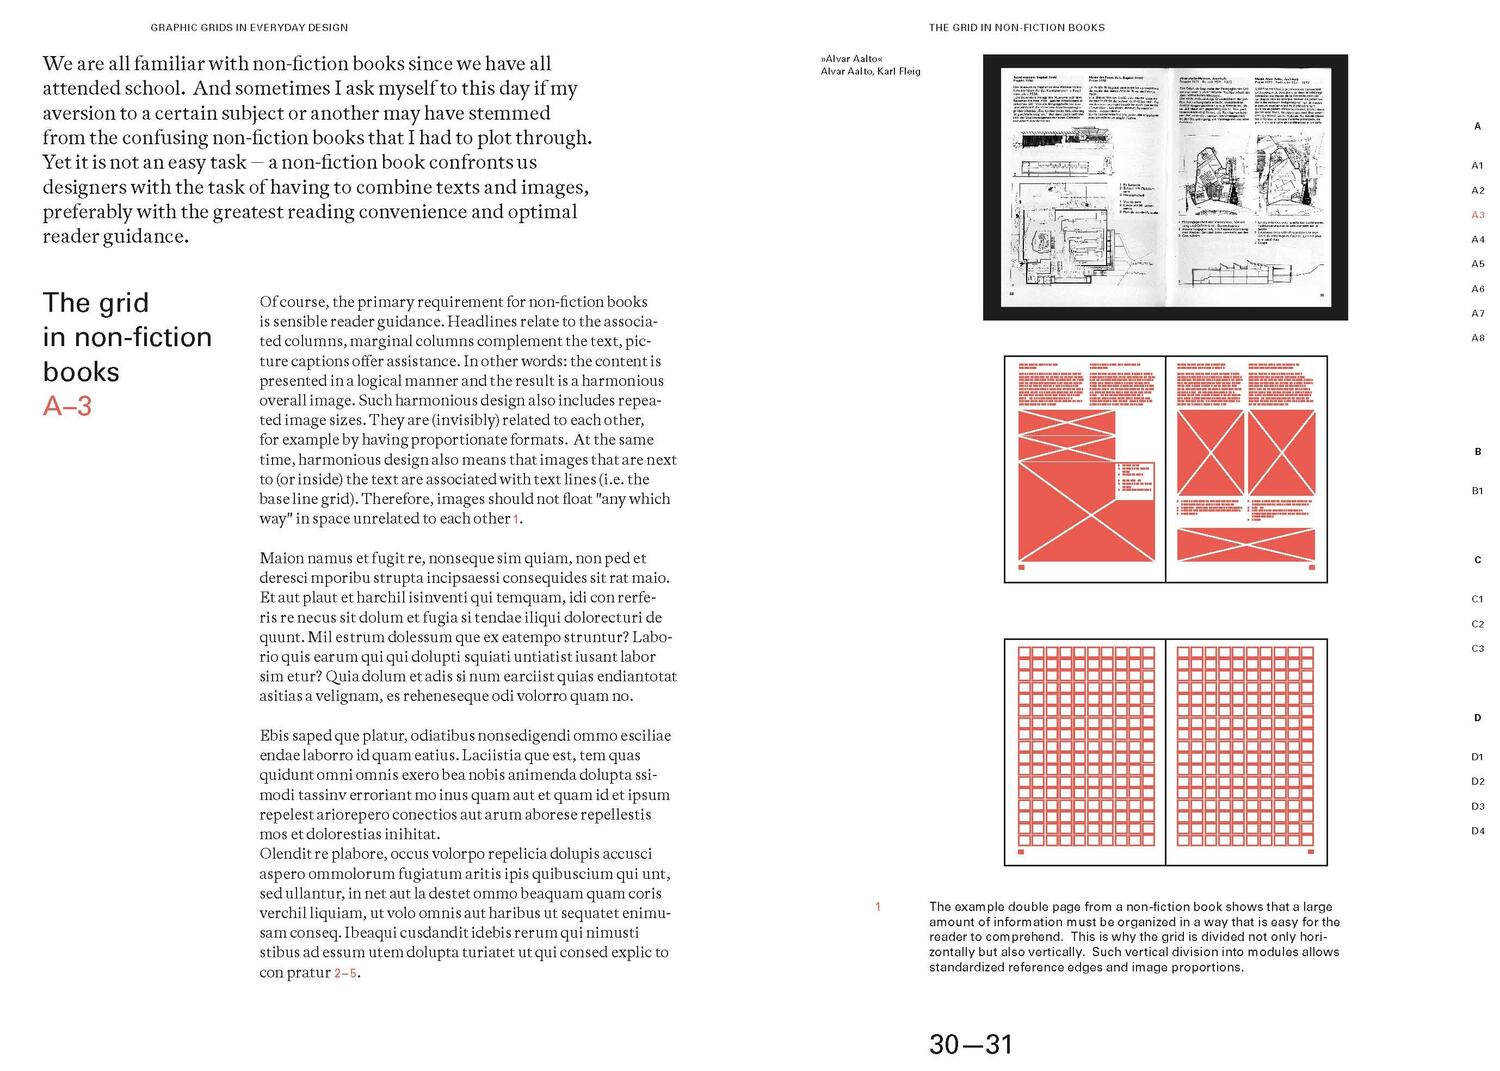 Bild: 9783721209945 | Structuring Design | Graphic Grids in Theory and Practice | Voelker